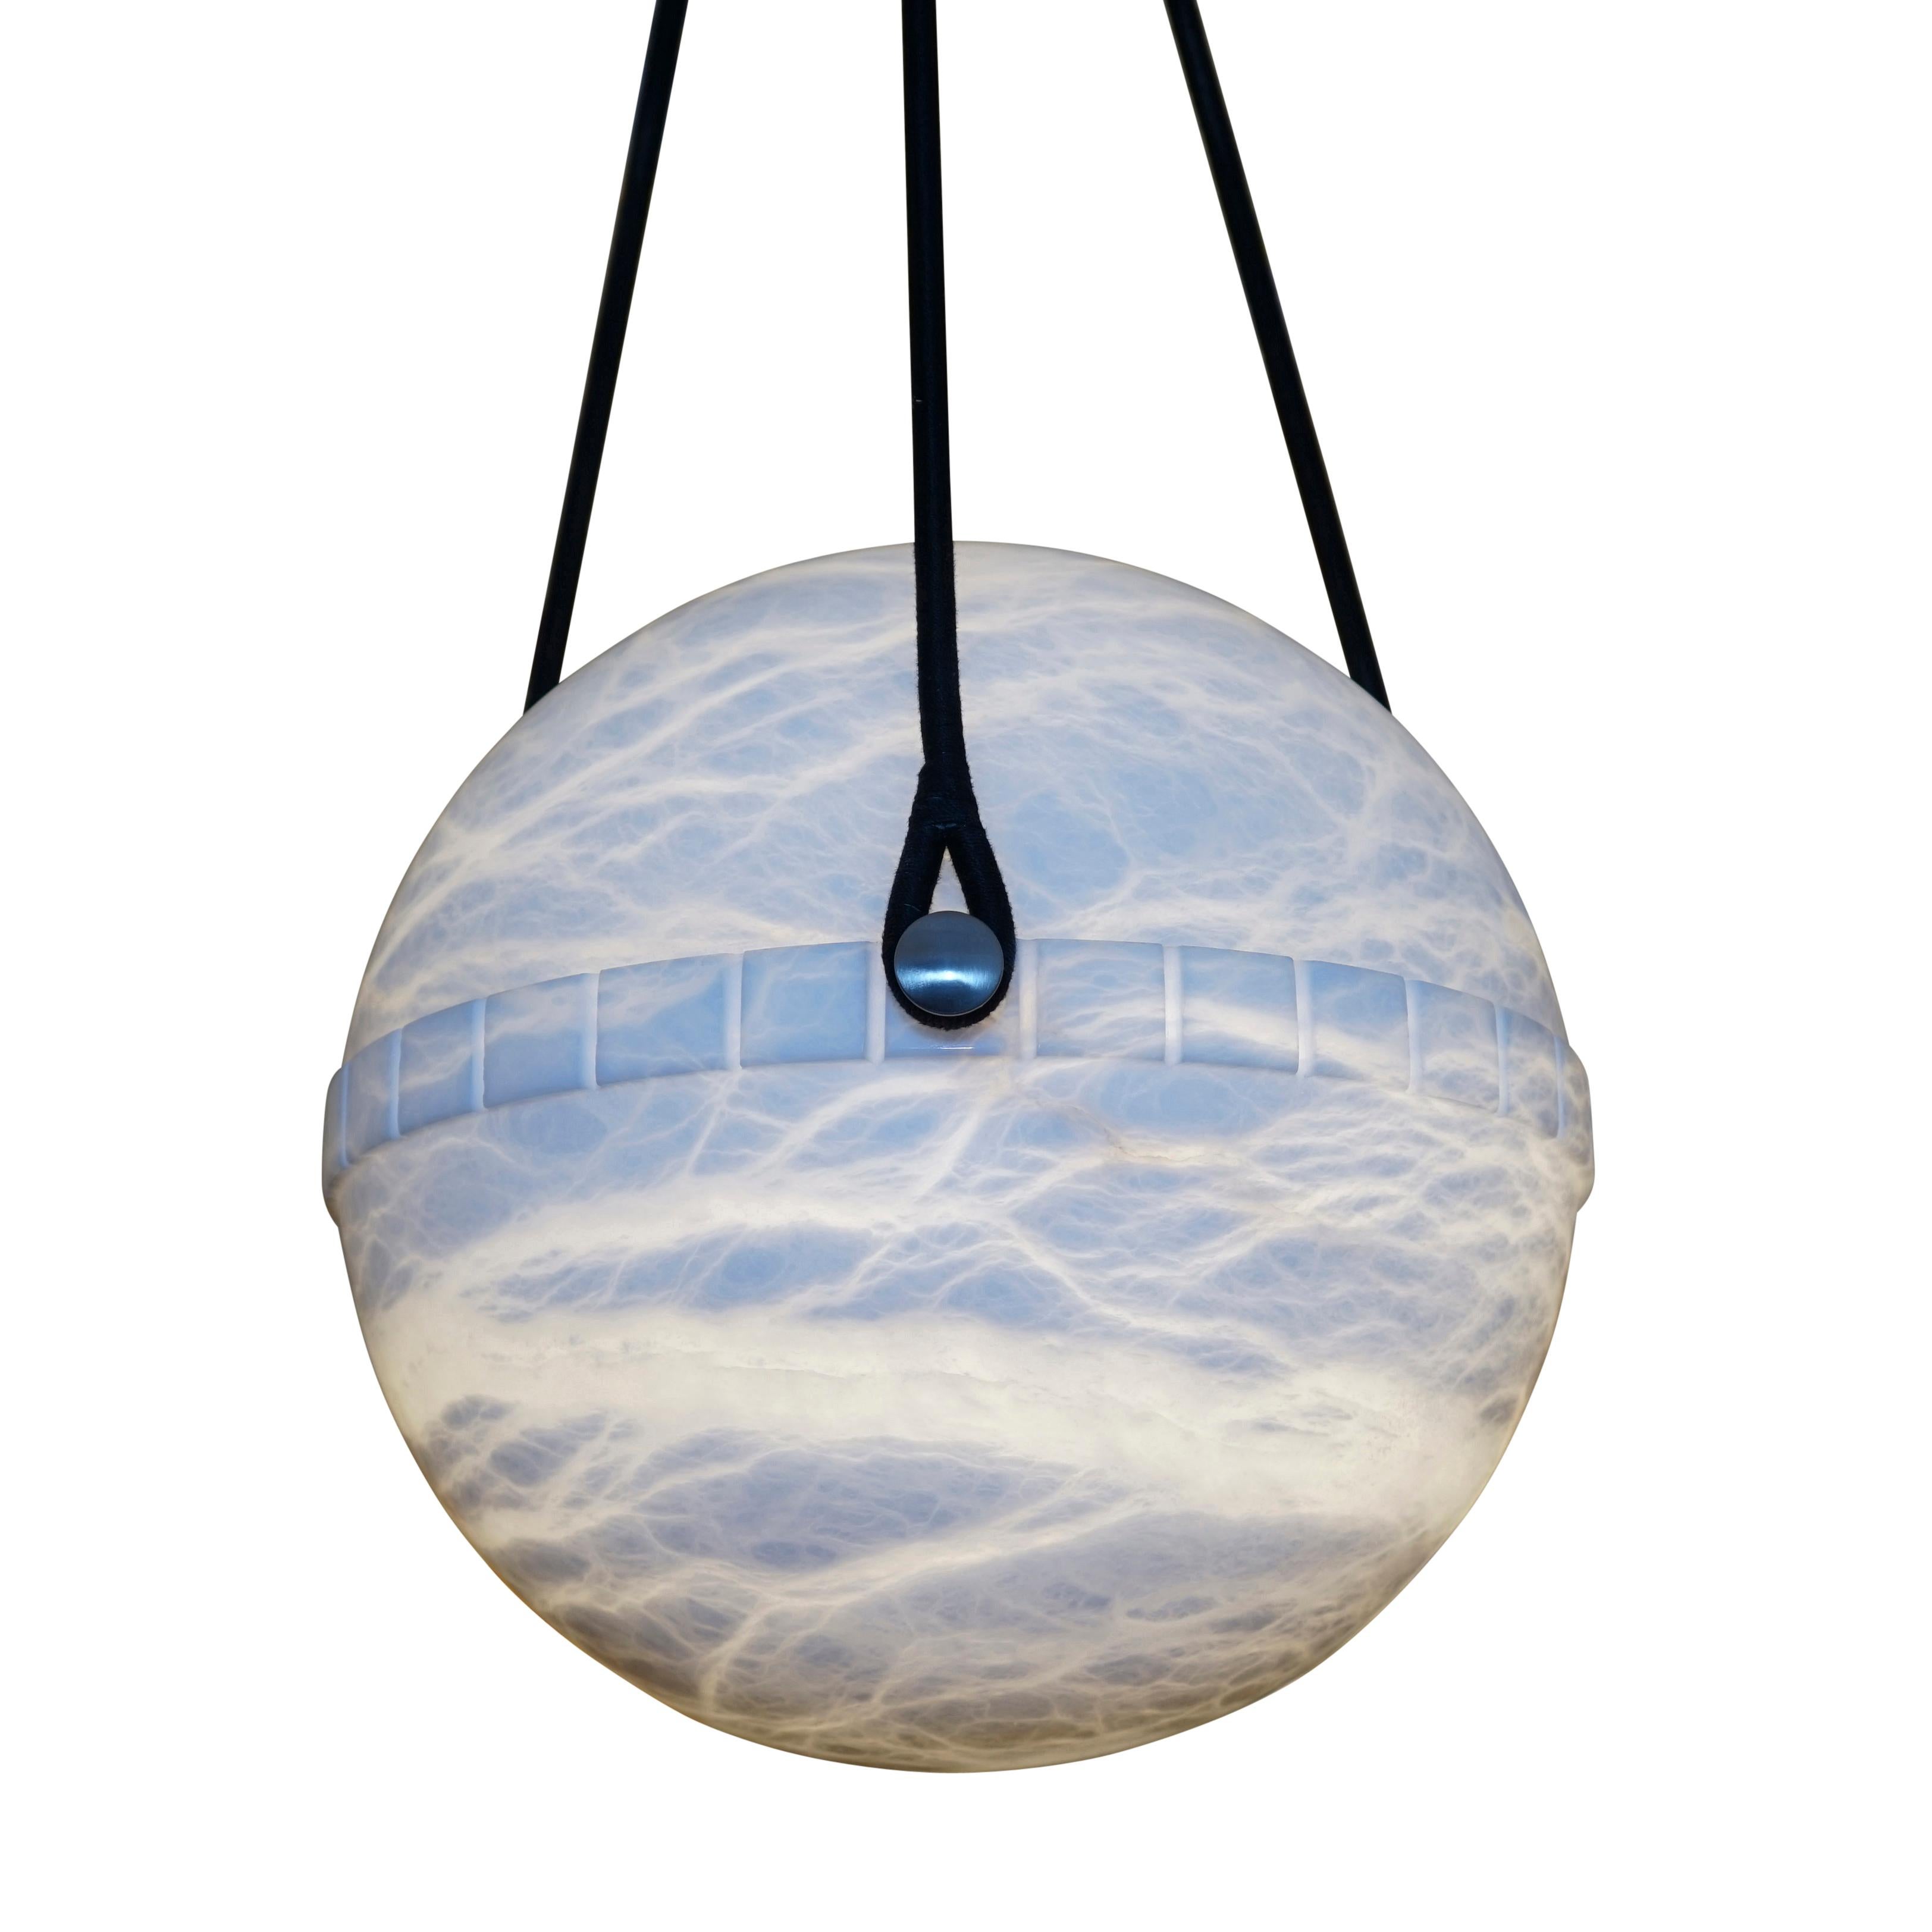 One of a pair; more unusual than the bowl shaped pendants, the globe alabaster features a lower half with a crisp dental motif on the central band and suspends on a set of three brushed nickel flattened balls. The upper half nestles perfectly into